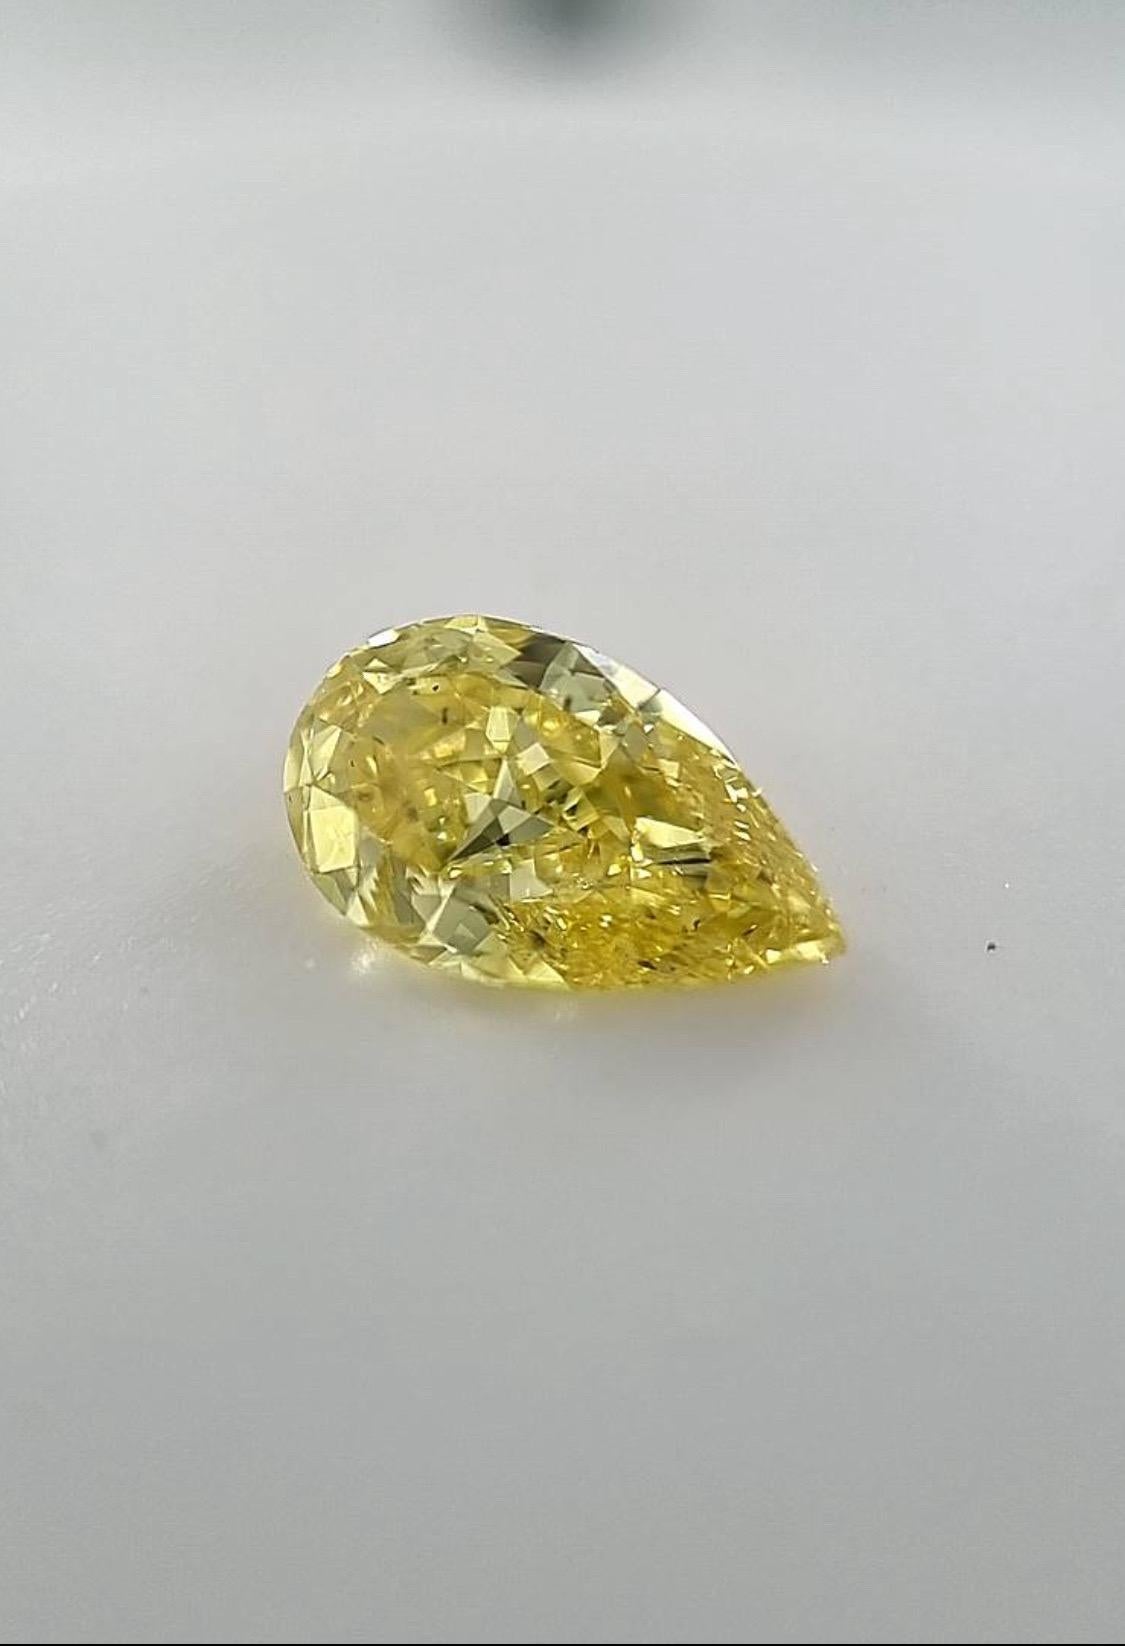 A magnificent natural vivid yellow diamond with just over 1.00 carat diamond. 
GIA certificated.  

Available as loose stone or can be made into a bespoke piece of high jewellery such as a pendant, ring, earrings, or bracelet. Reach out for a